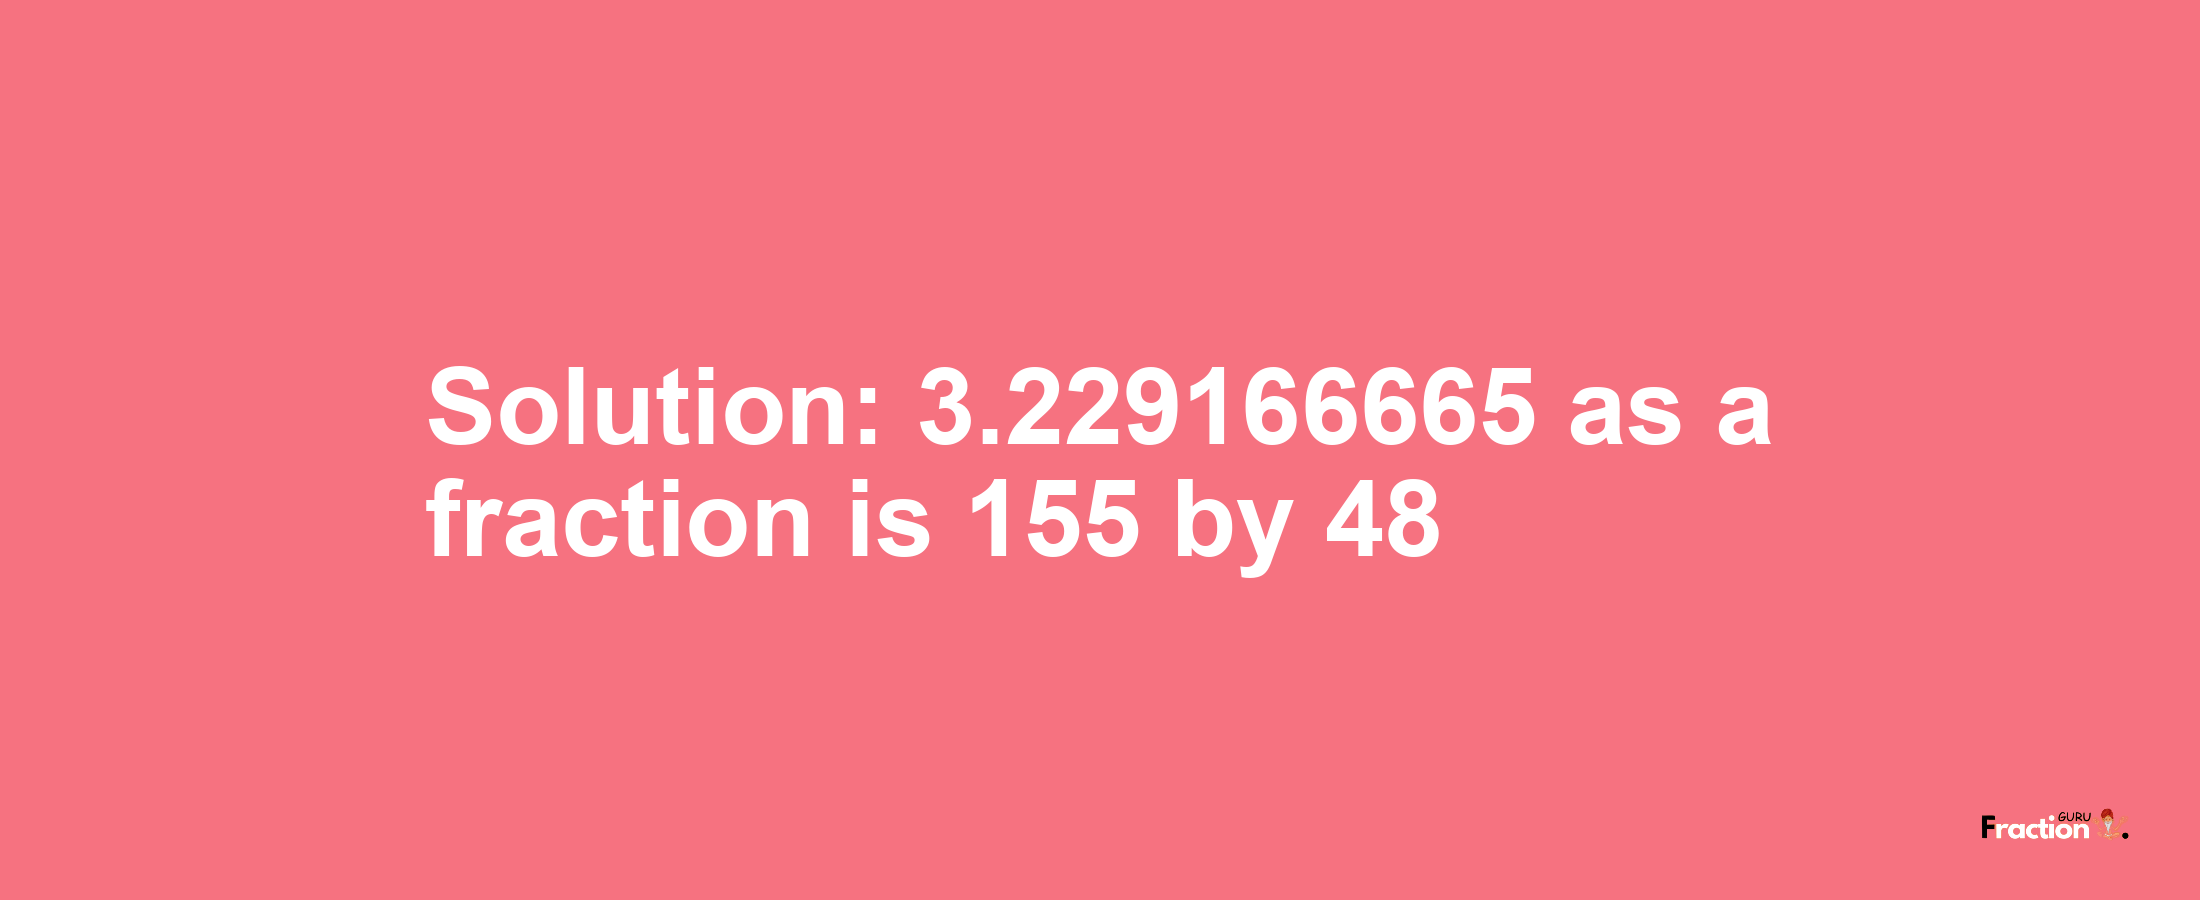 Solution:3.229166665 as a fraction is 155/48